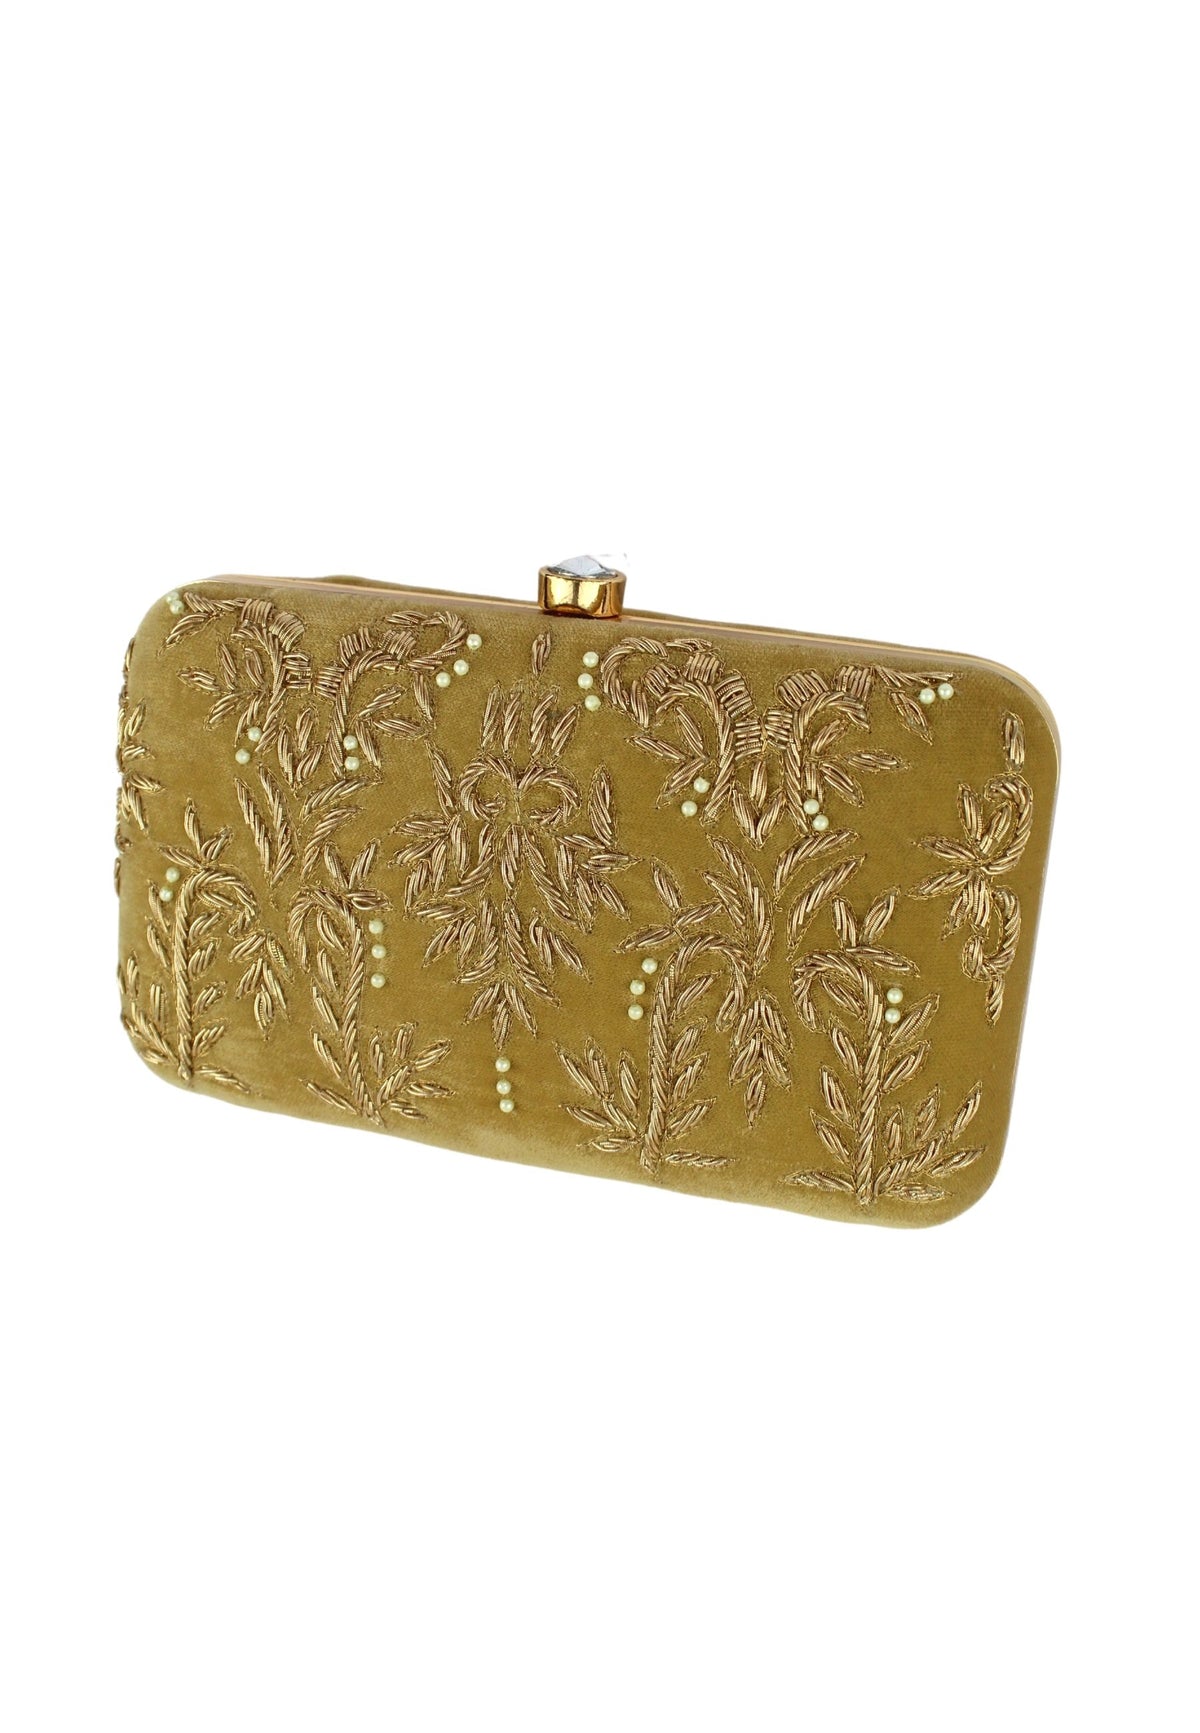 copy of royal charm clutch with stone opening Bombay Sunset